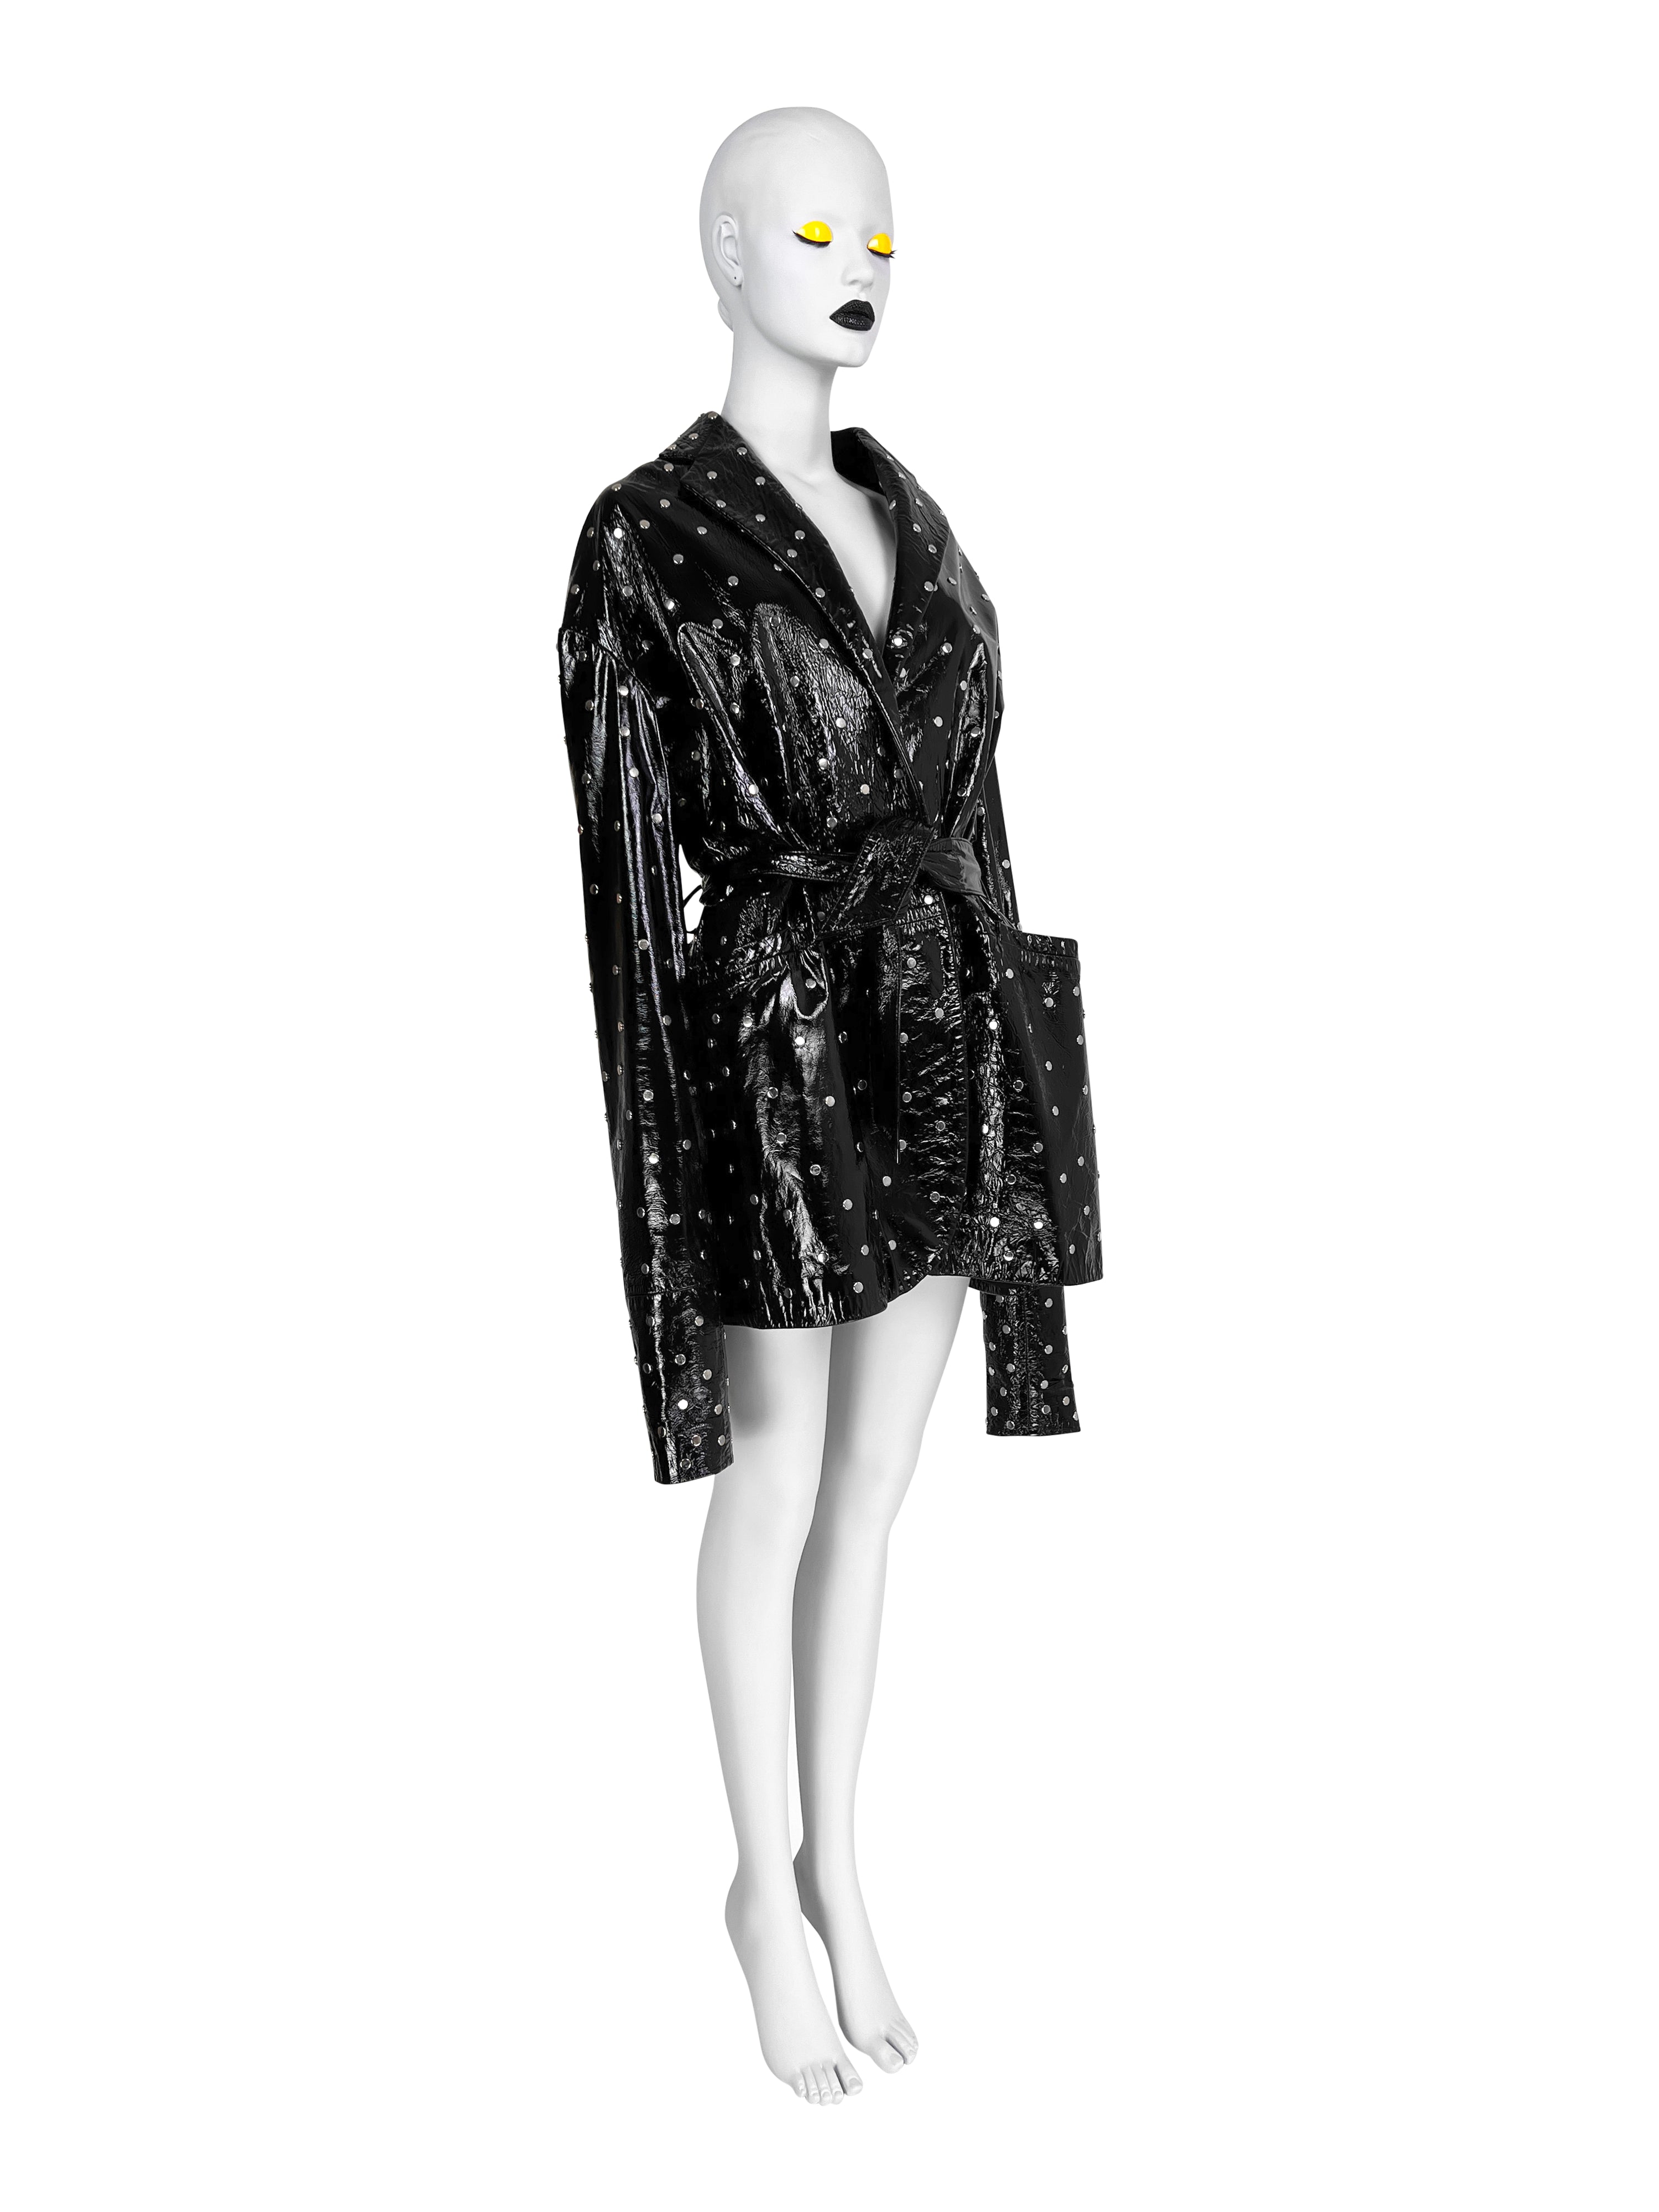 Dolce & Gabbana Spring 1991 Patent Leather Coat